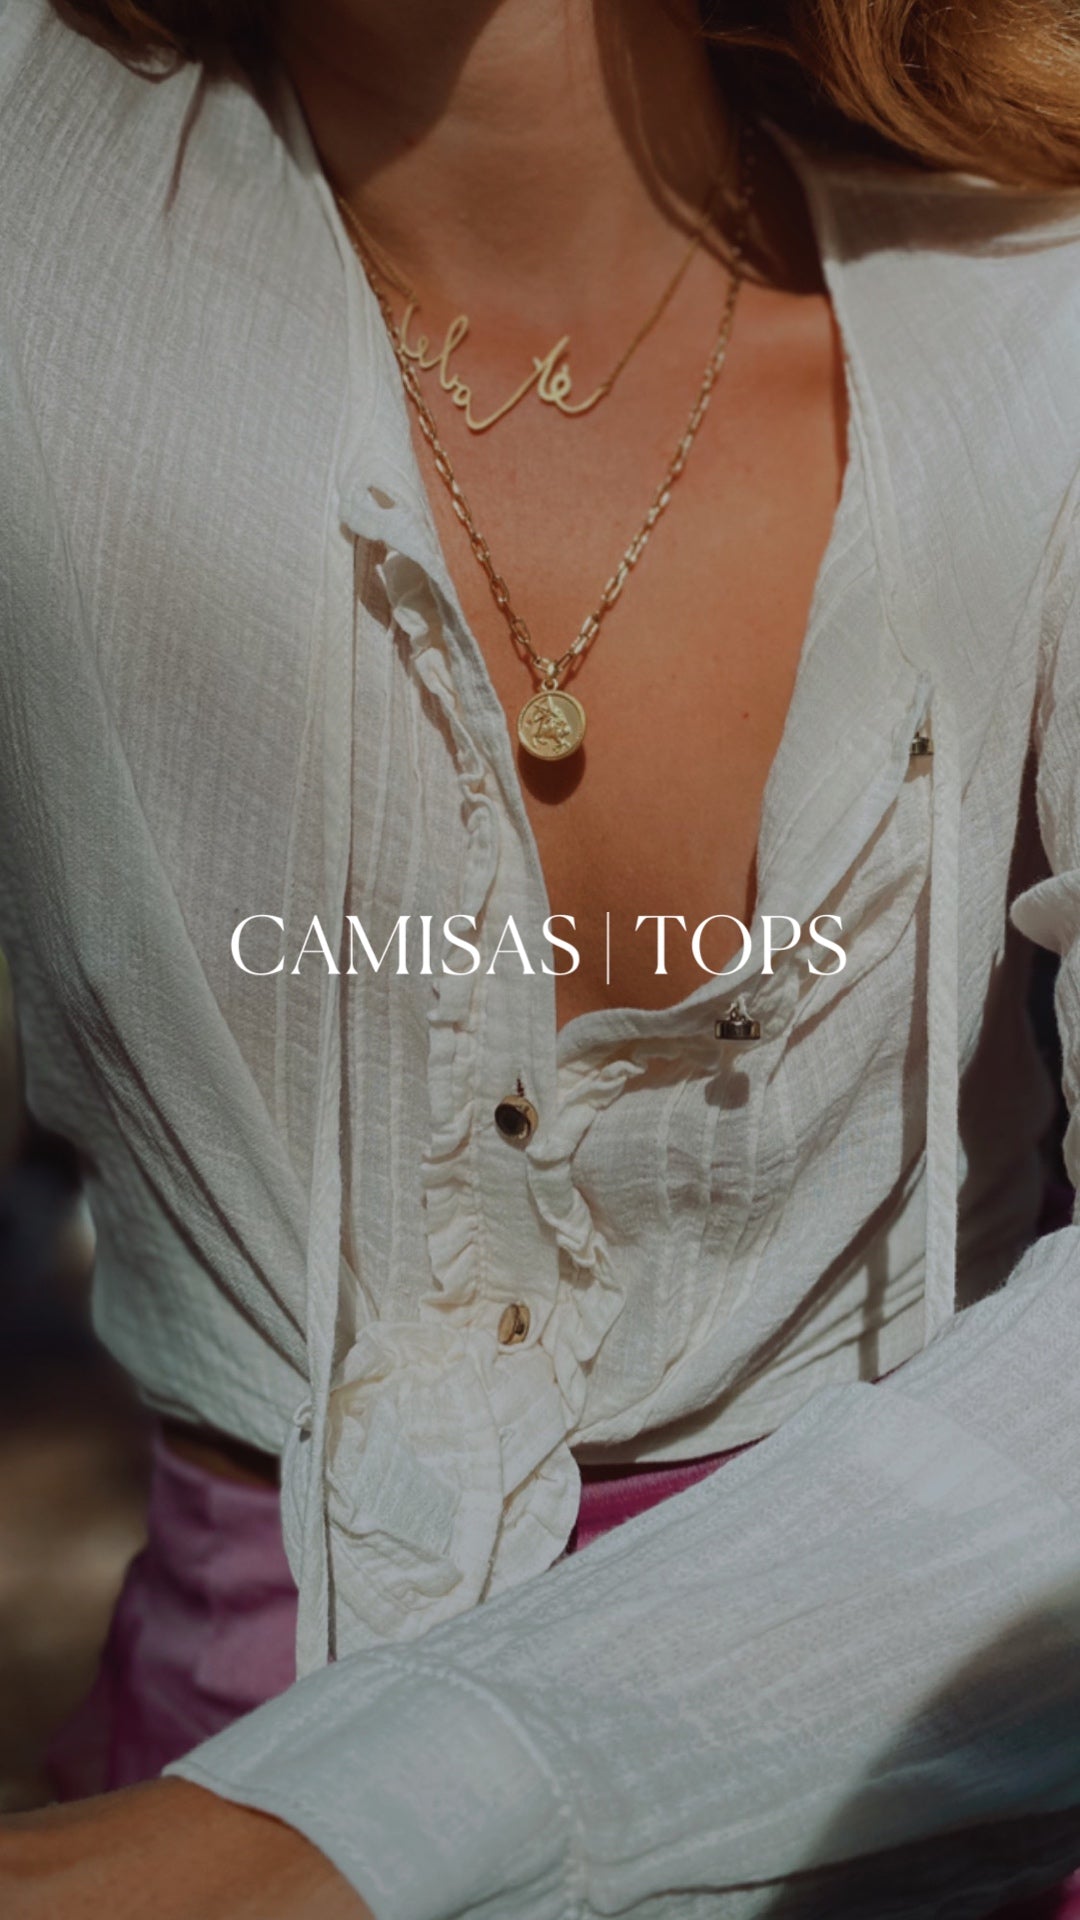 CAMISAS | TOPS